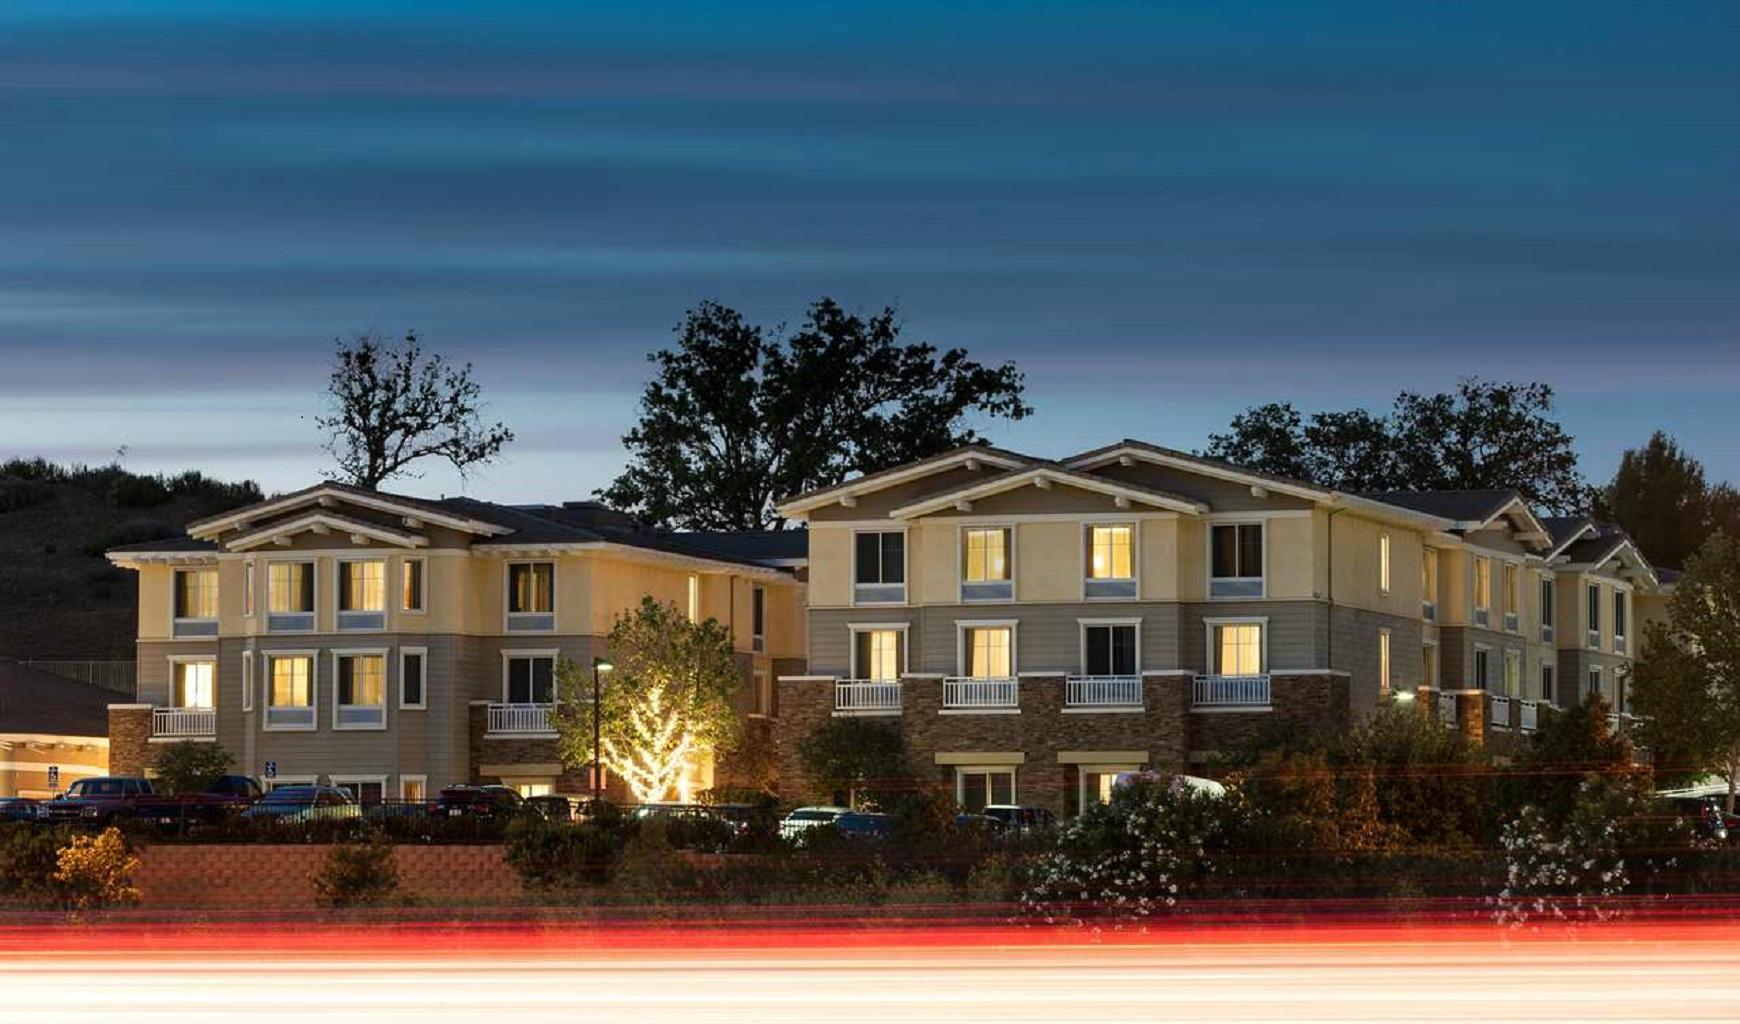 Photo of Homewood Suites by Hilton Agoura Hills, Agoura Hills, CA